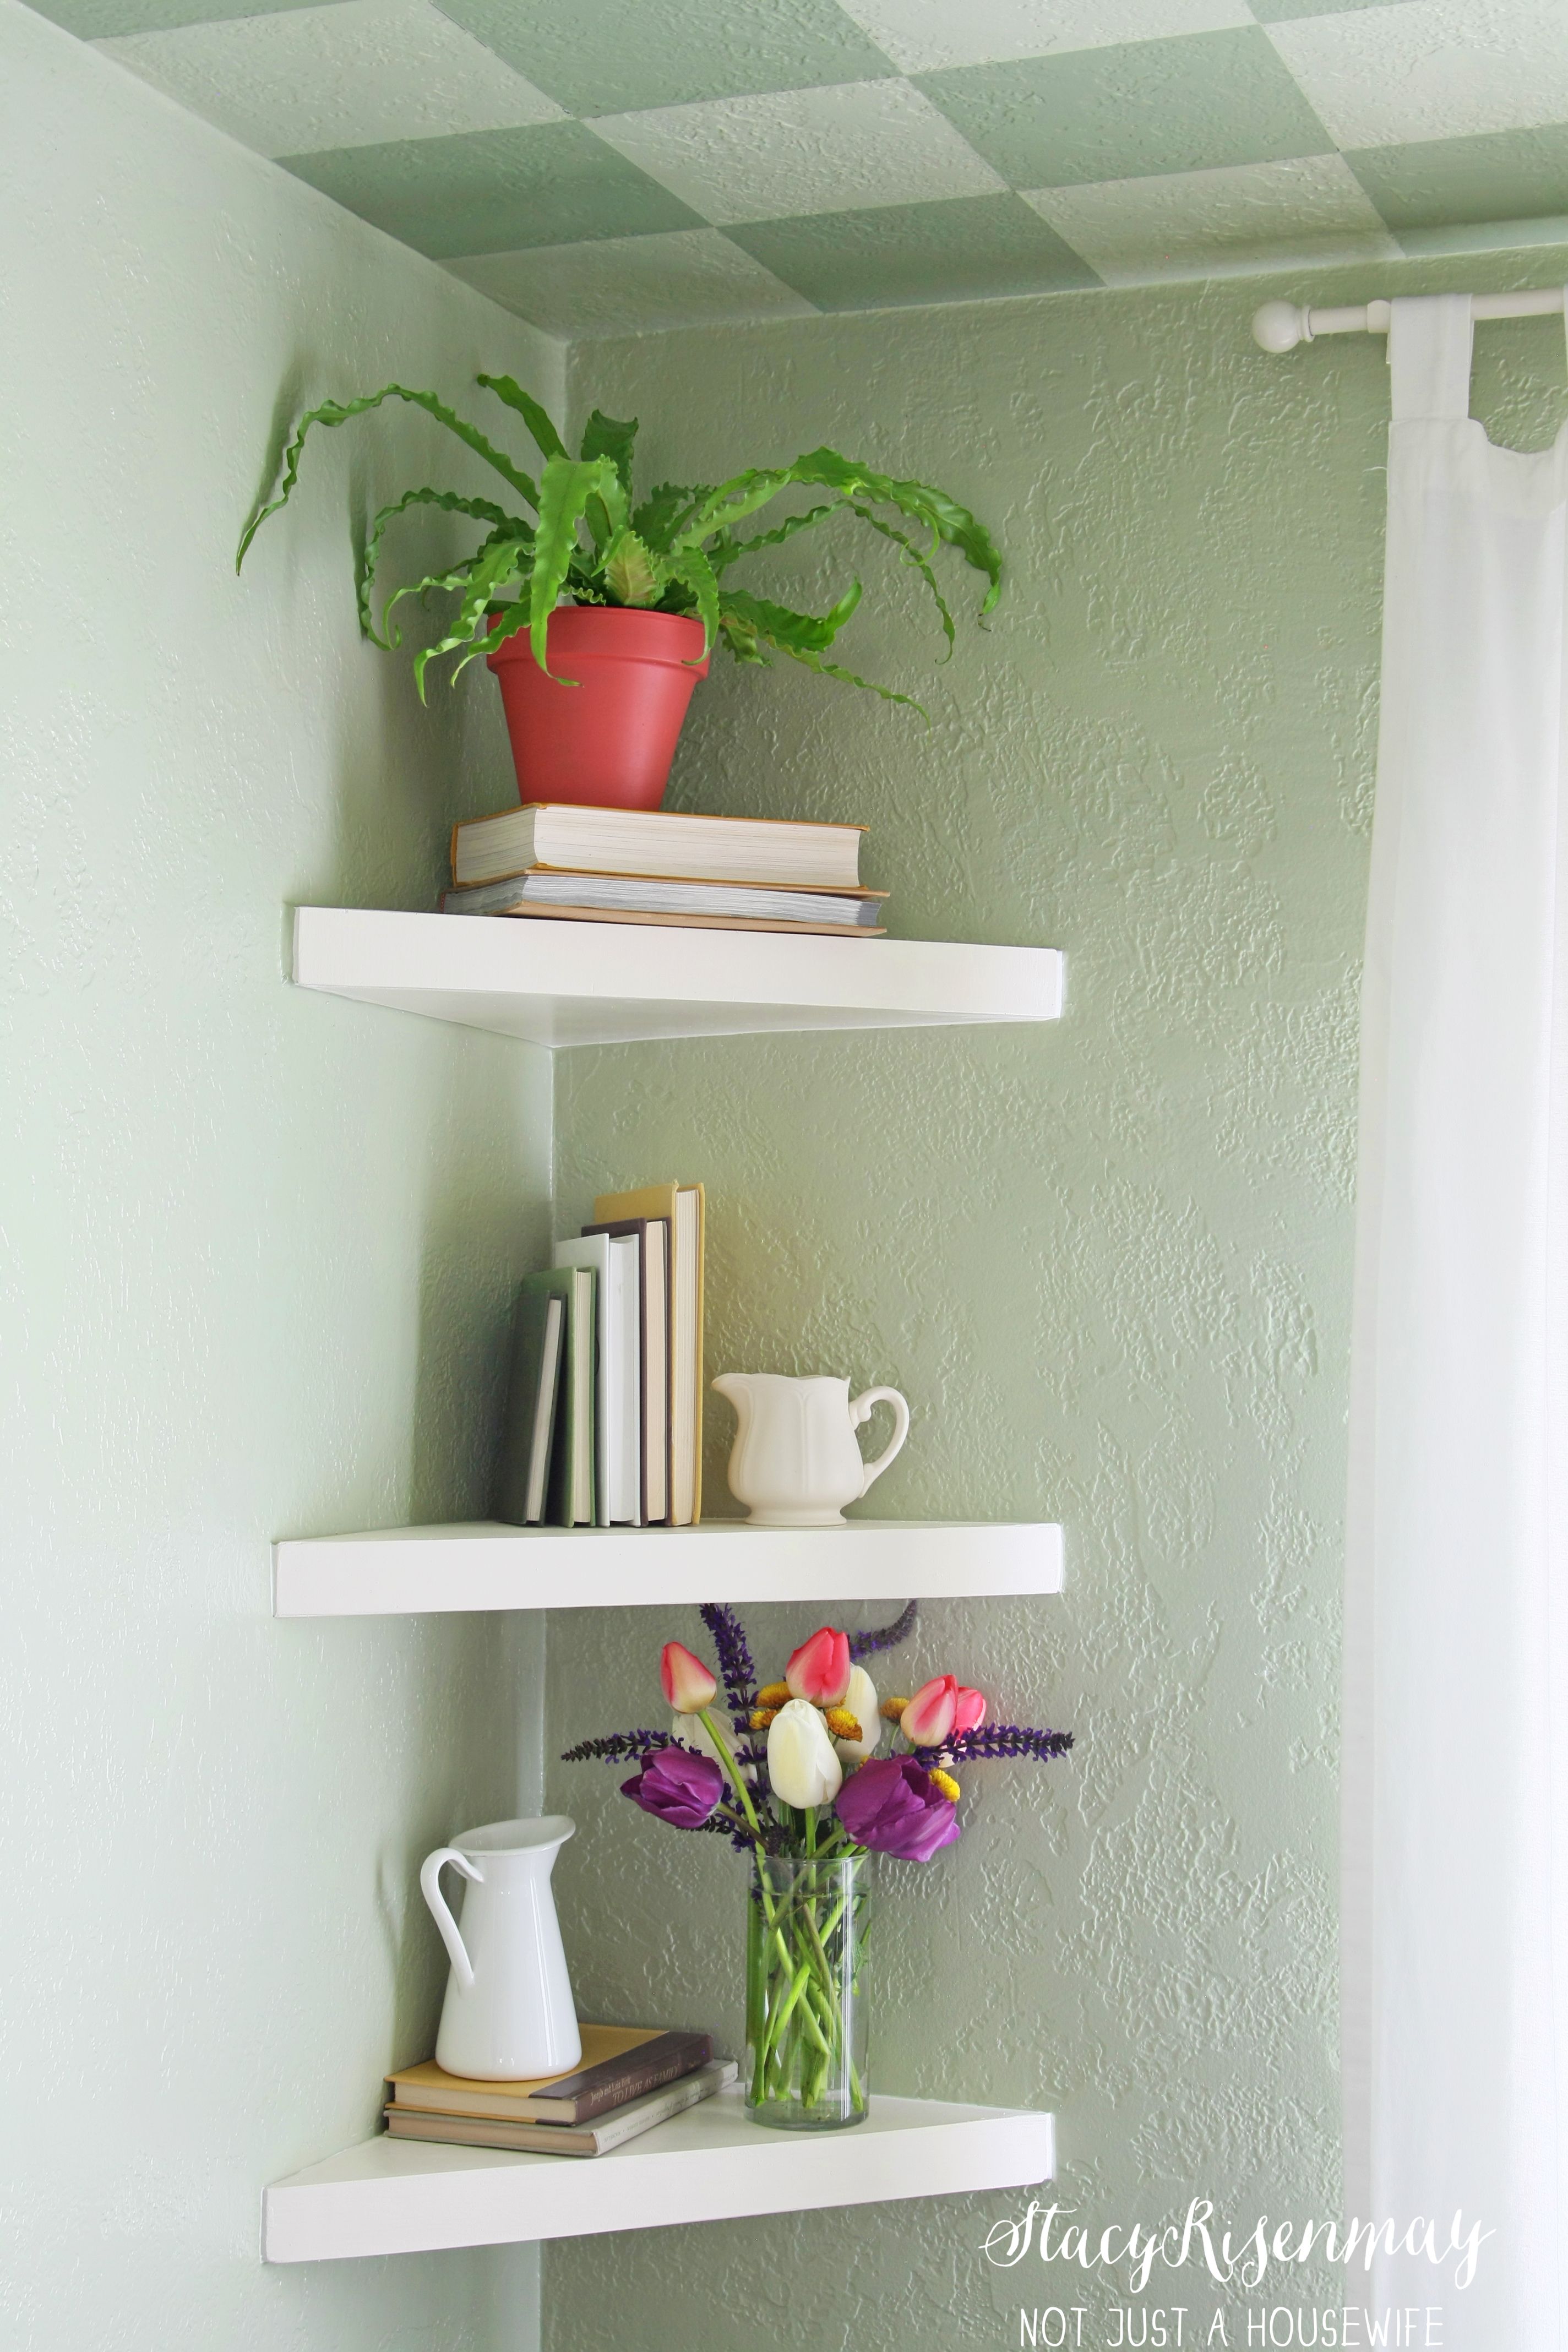 Ideas For Floating Shelves, Cool Stuff To Put On Shelves